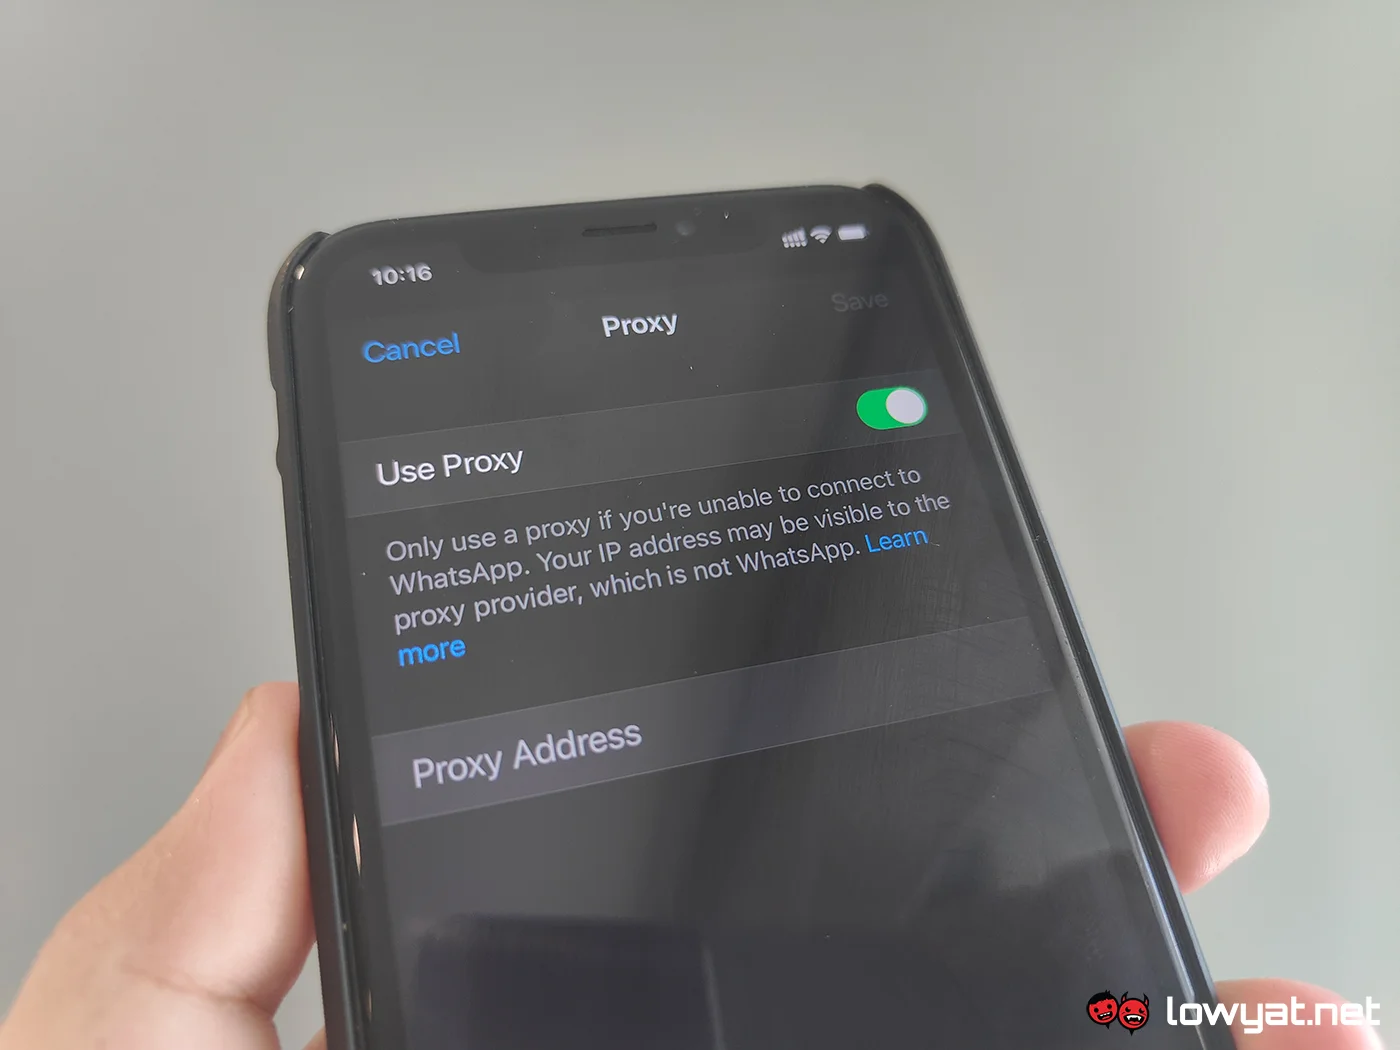 WhatsApp Launches Proxy Service For Users To Get Around Internet Shutdowns - 82